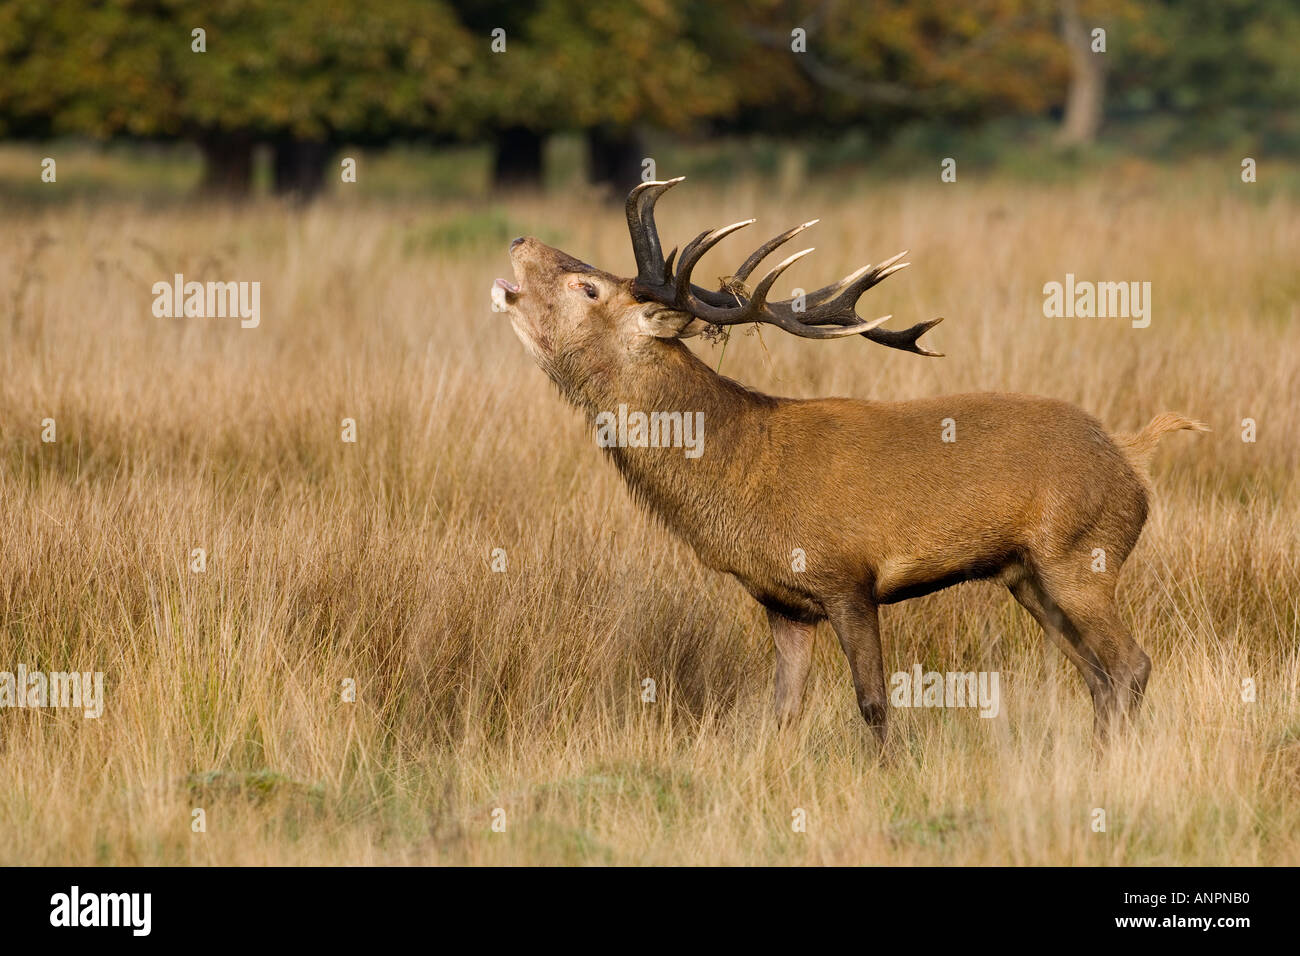 Red Deer Cervus elaphus stag with mouth open roaring standing in grass wth trees in background richmond park london Stock Photo